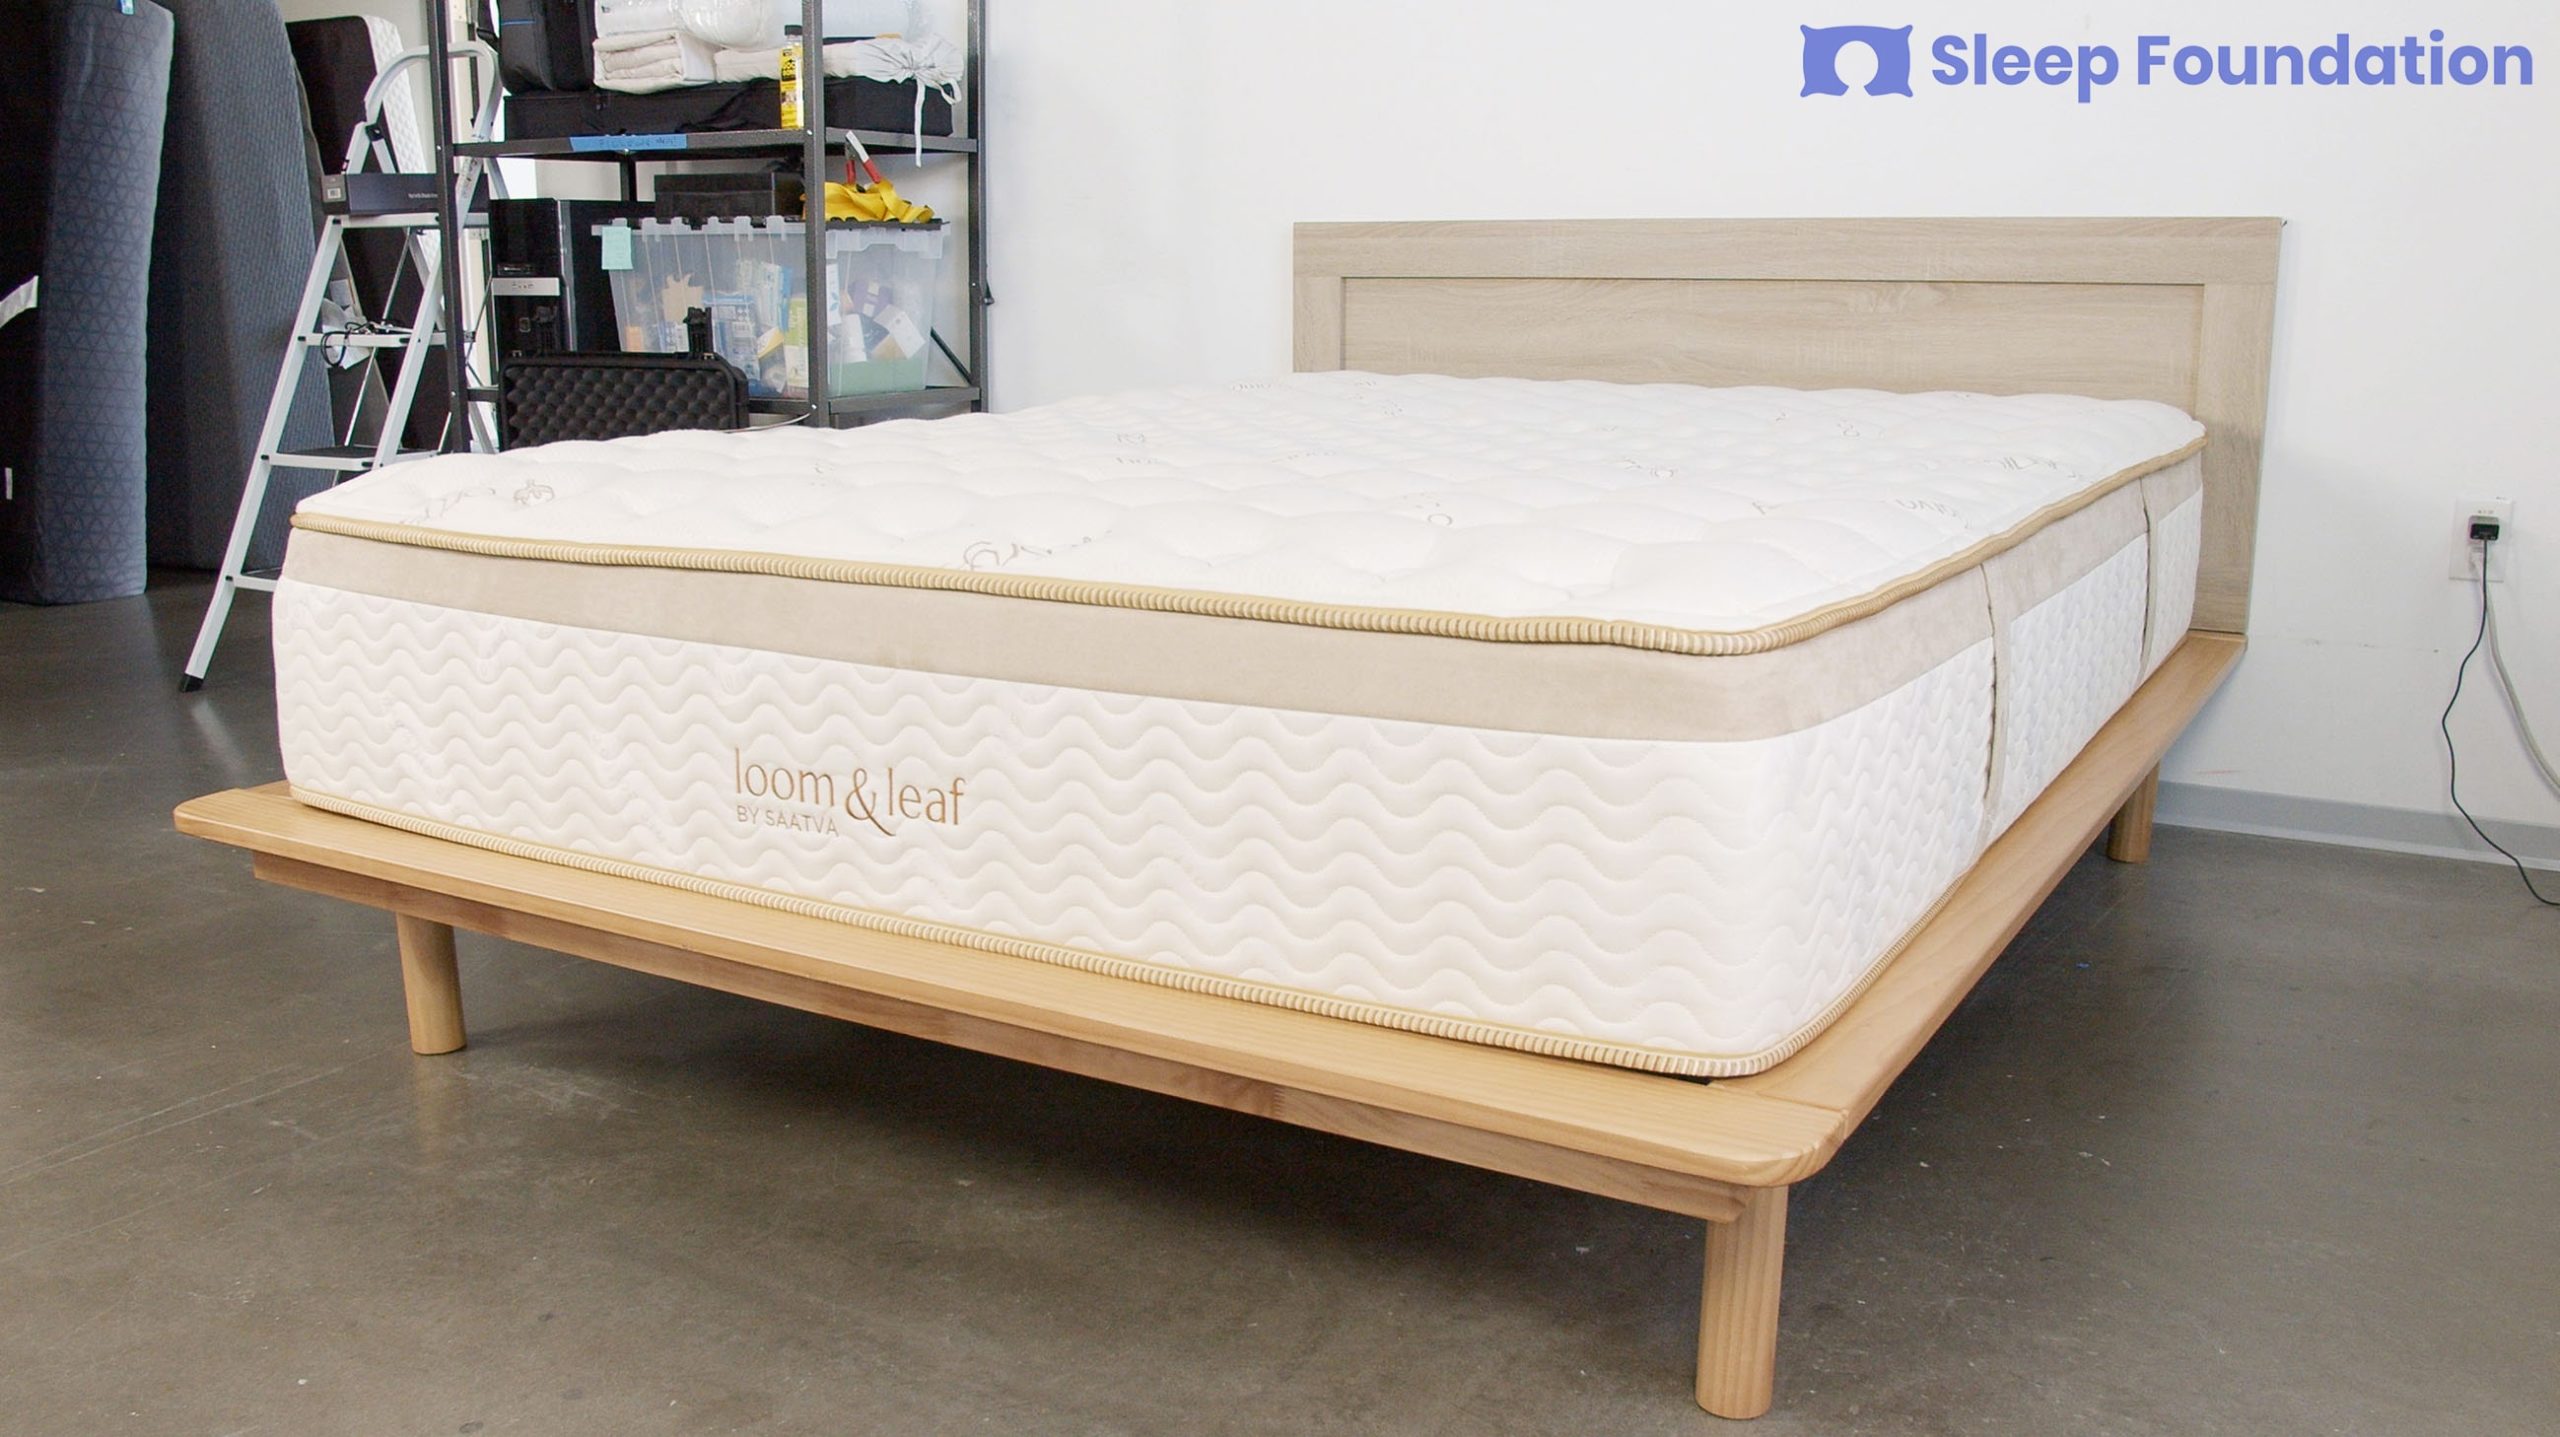 Details about   10cm Mattress 100%Natural Memory Foam Latex  Stereoscopic Breathable Comfortable 